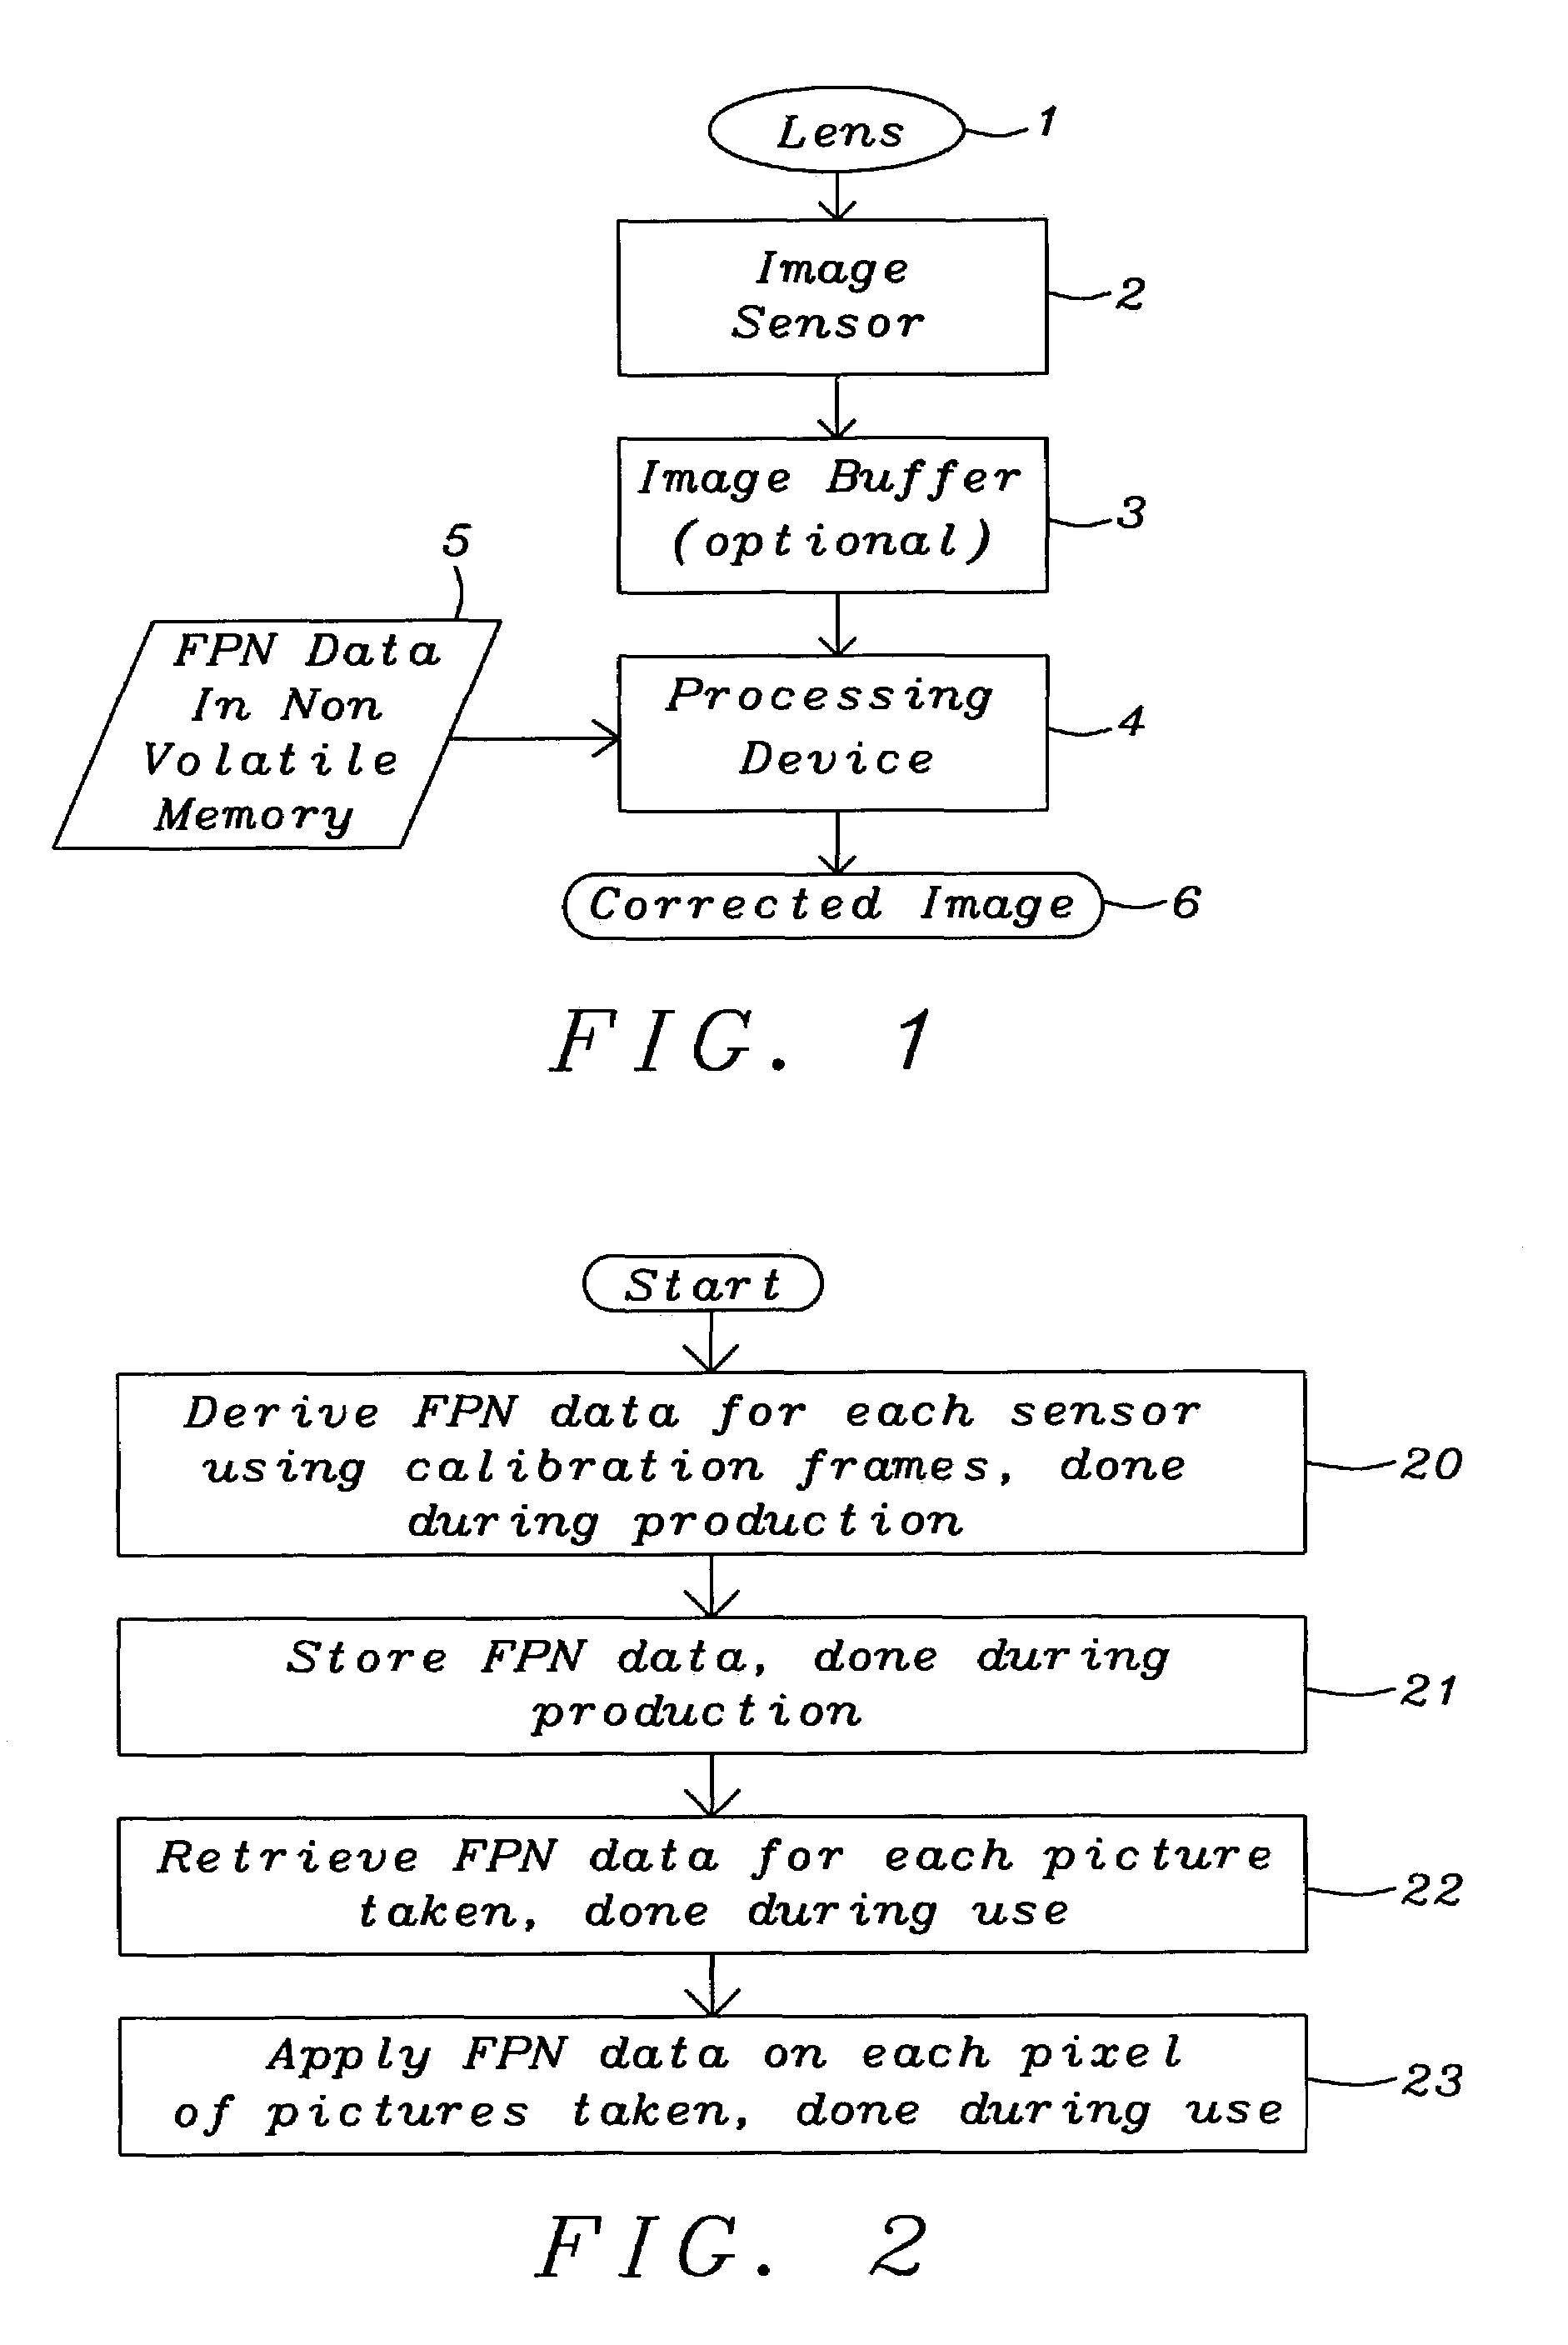 Fixed pattern noise compensation with low memory requirements